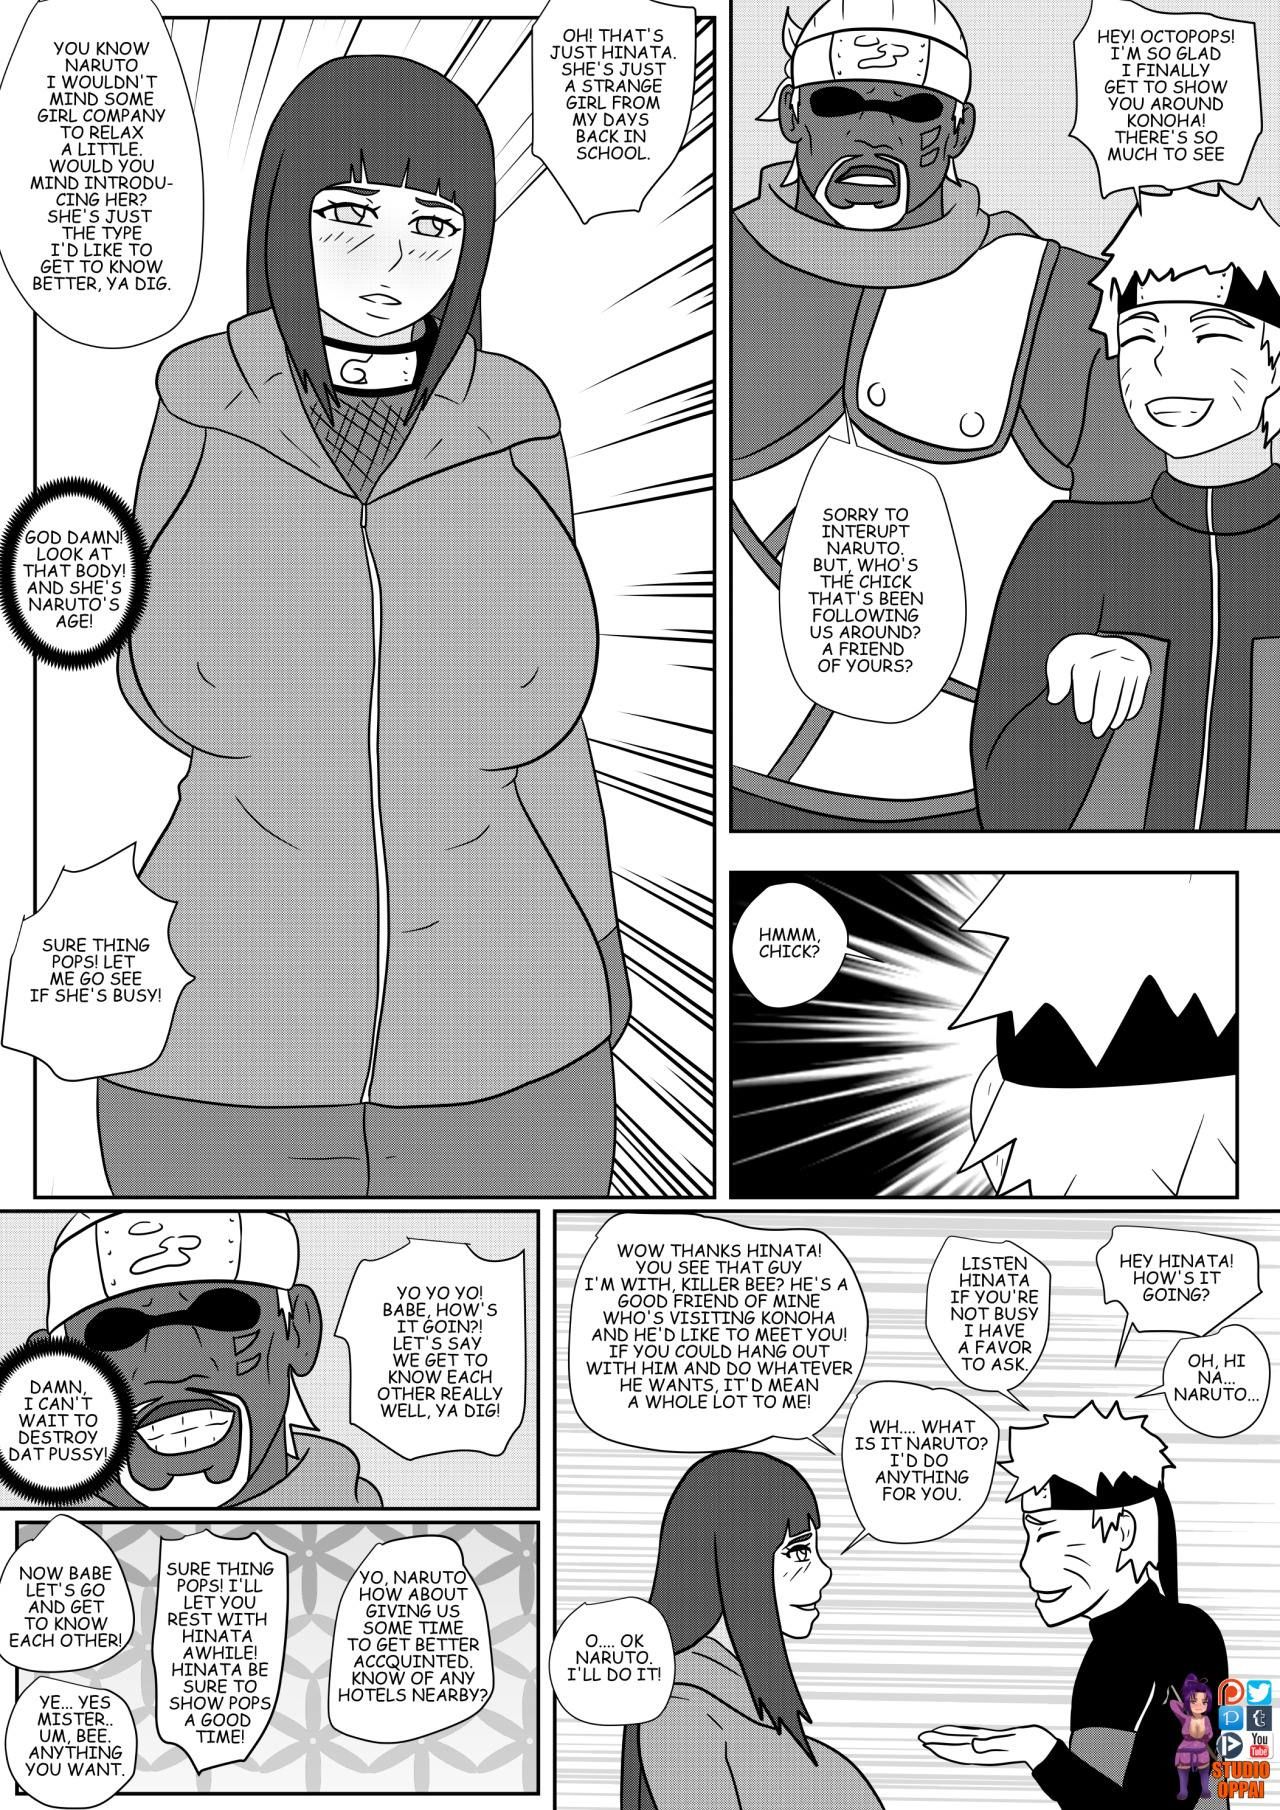 Size Does Matter After All Naruto by Studio Oppai page 2